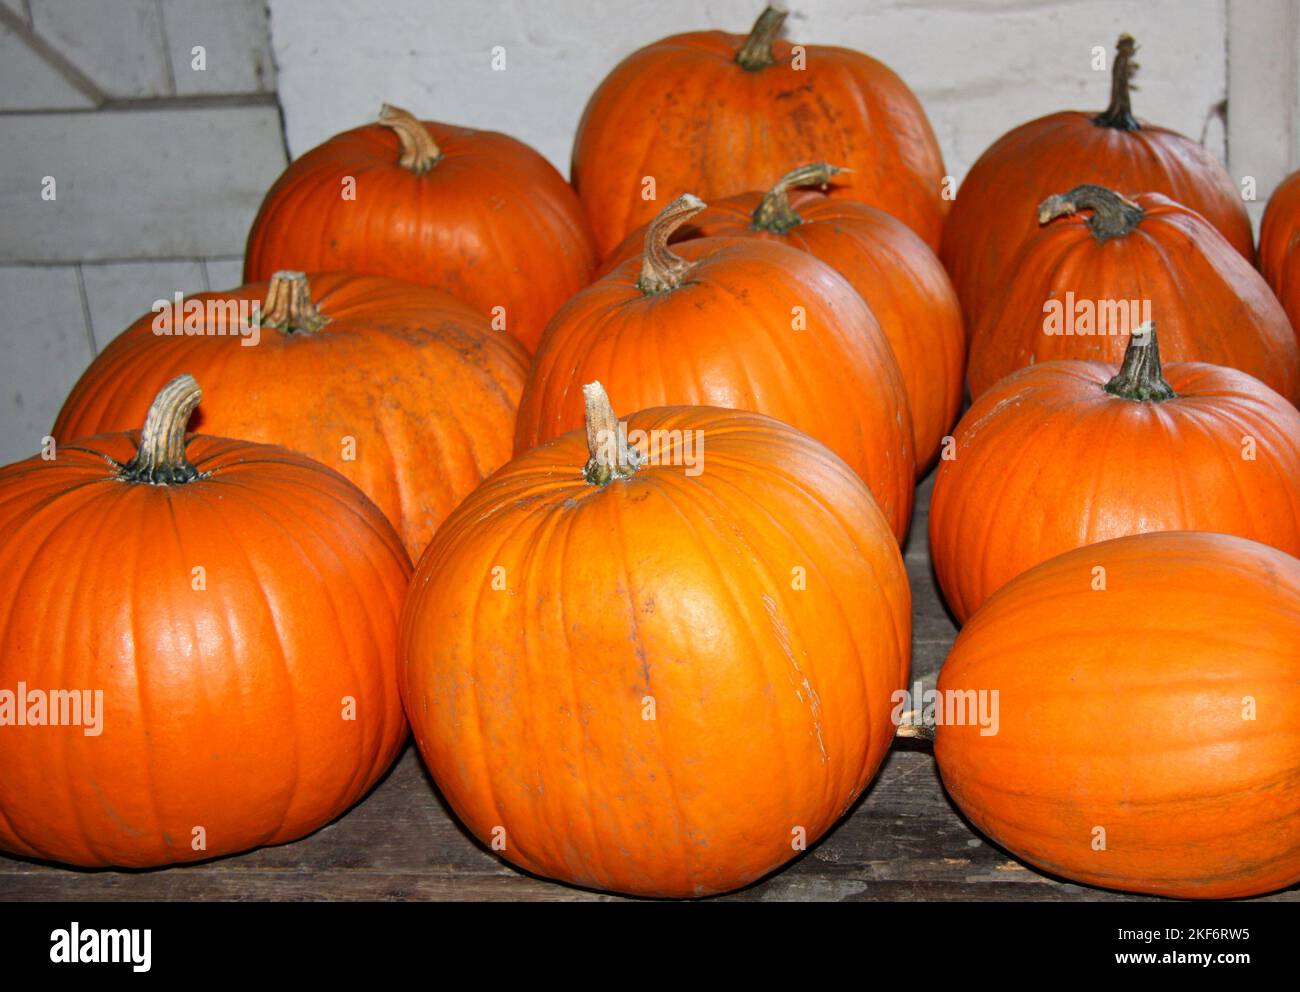 A Great Collection of Freshly Grown Orange Pumpkins. Stock Photo